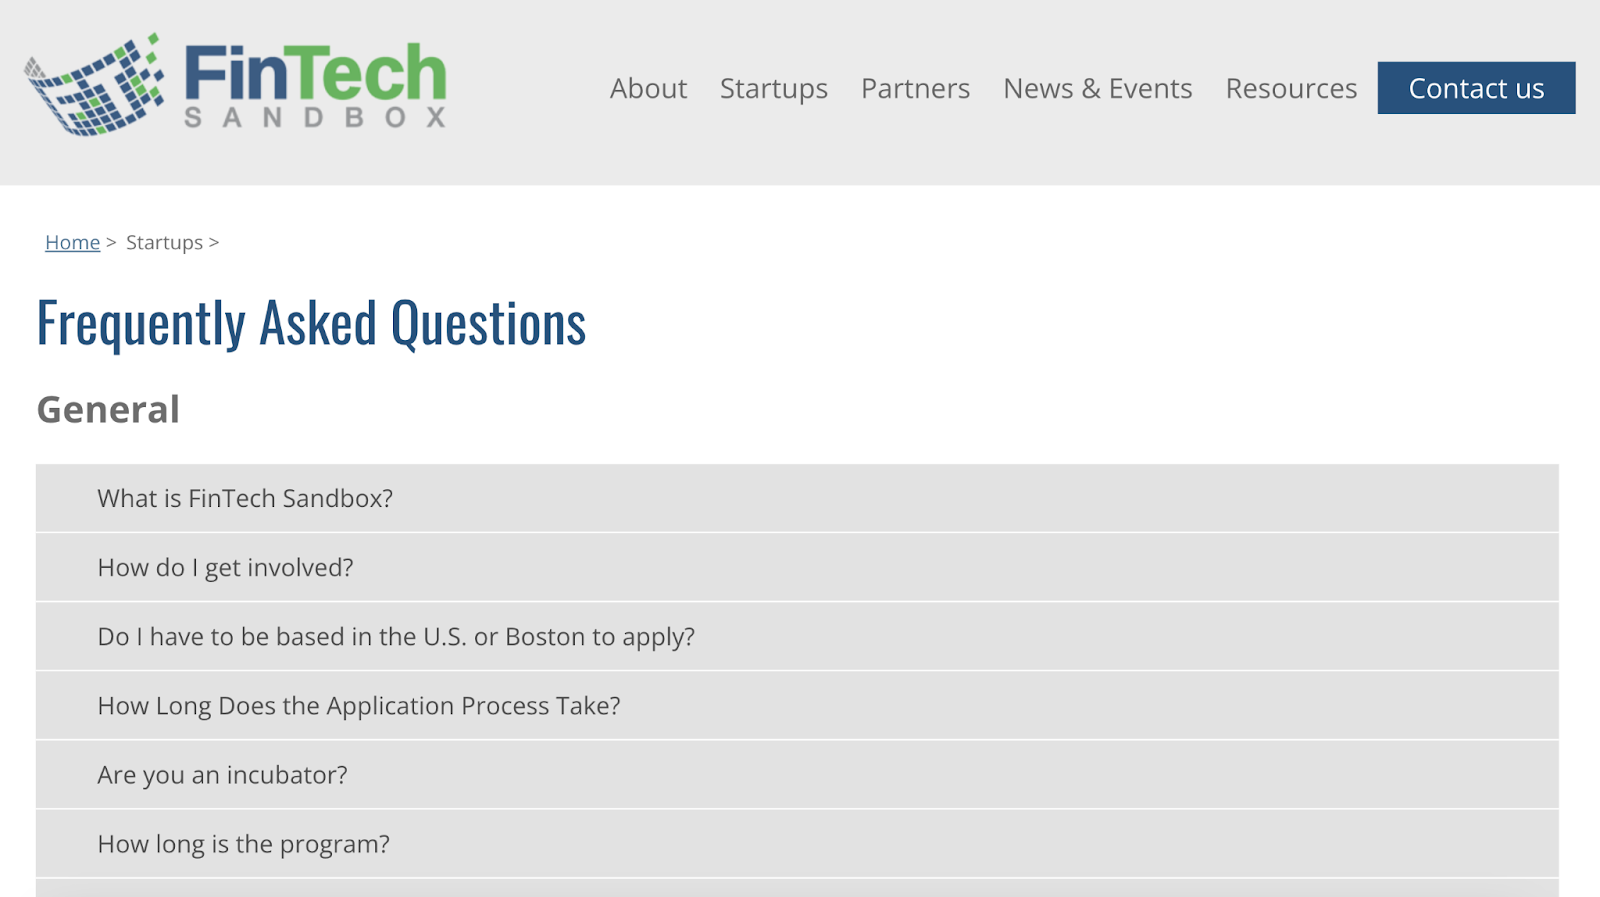 Frequently asked questions on the FinTech Sandbox' site